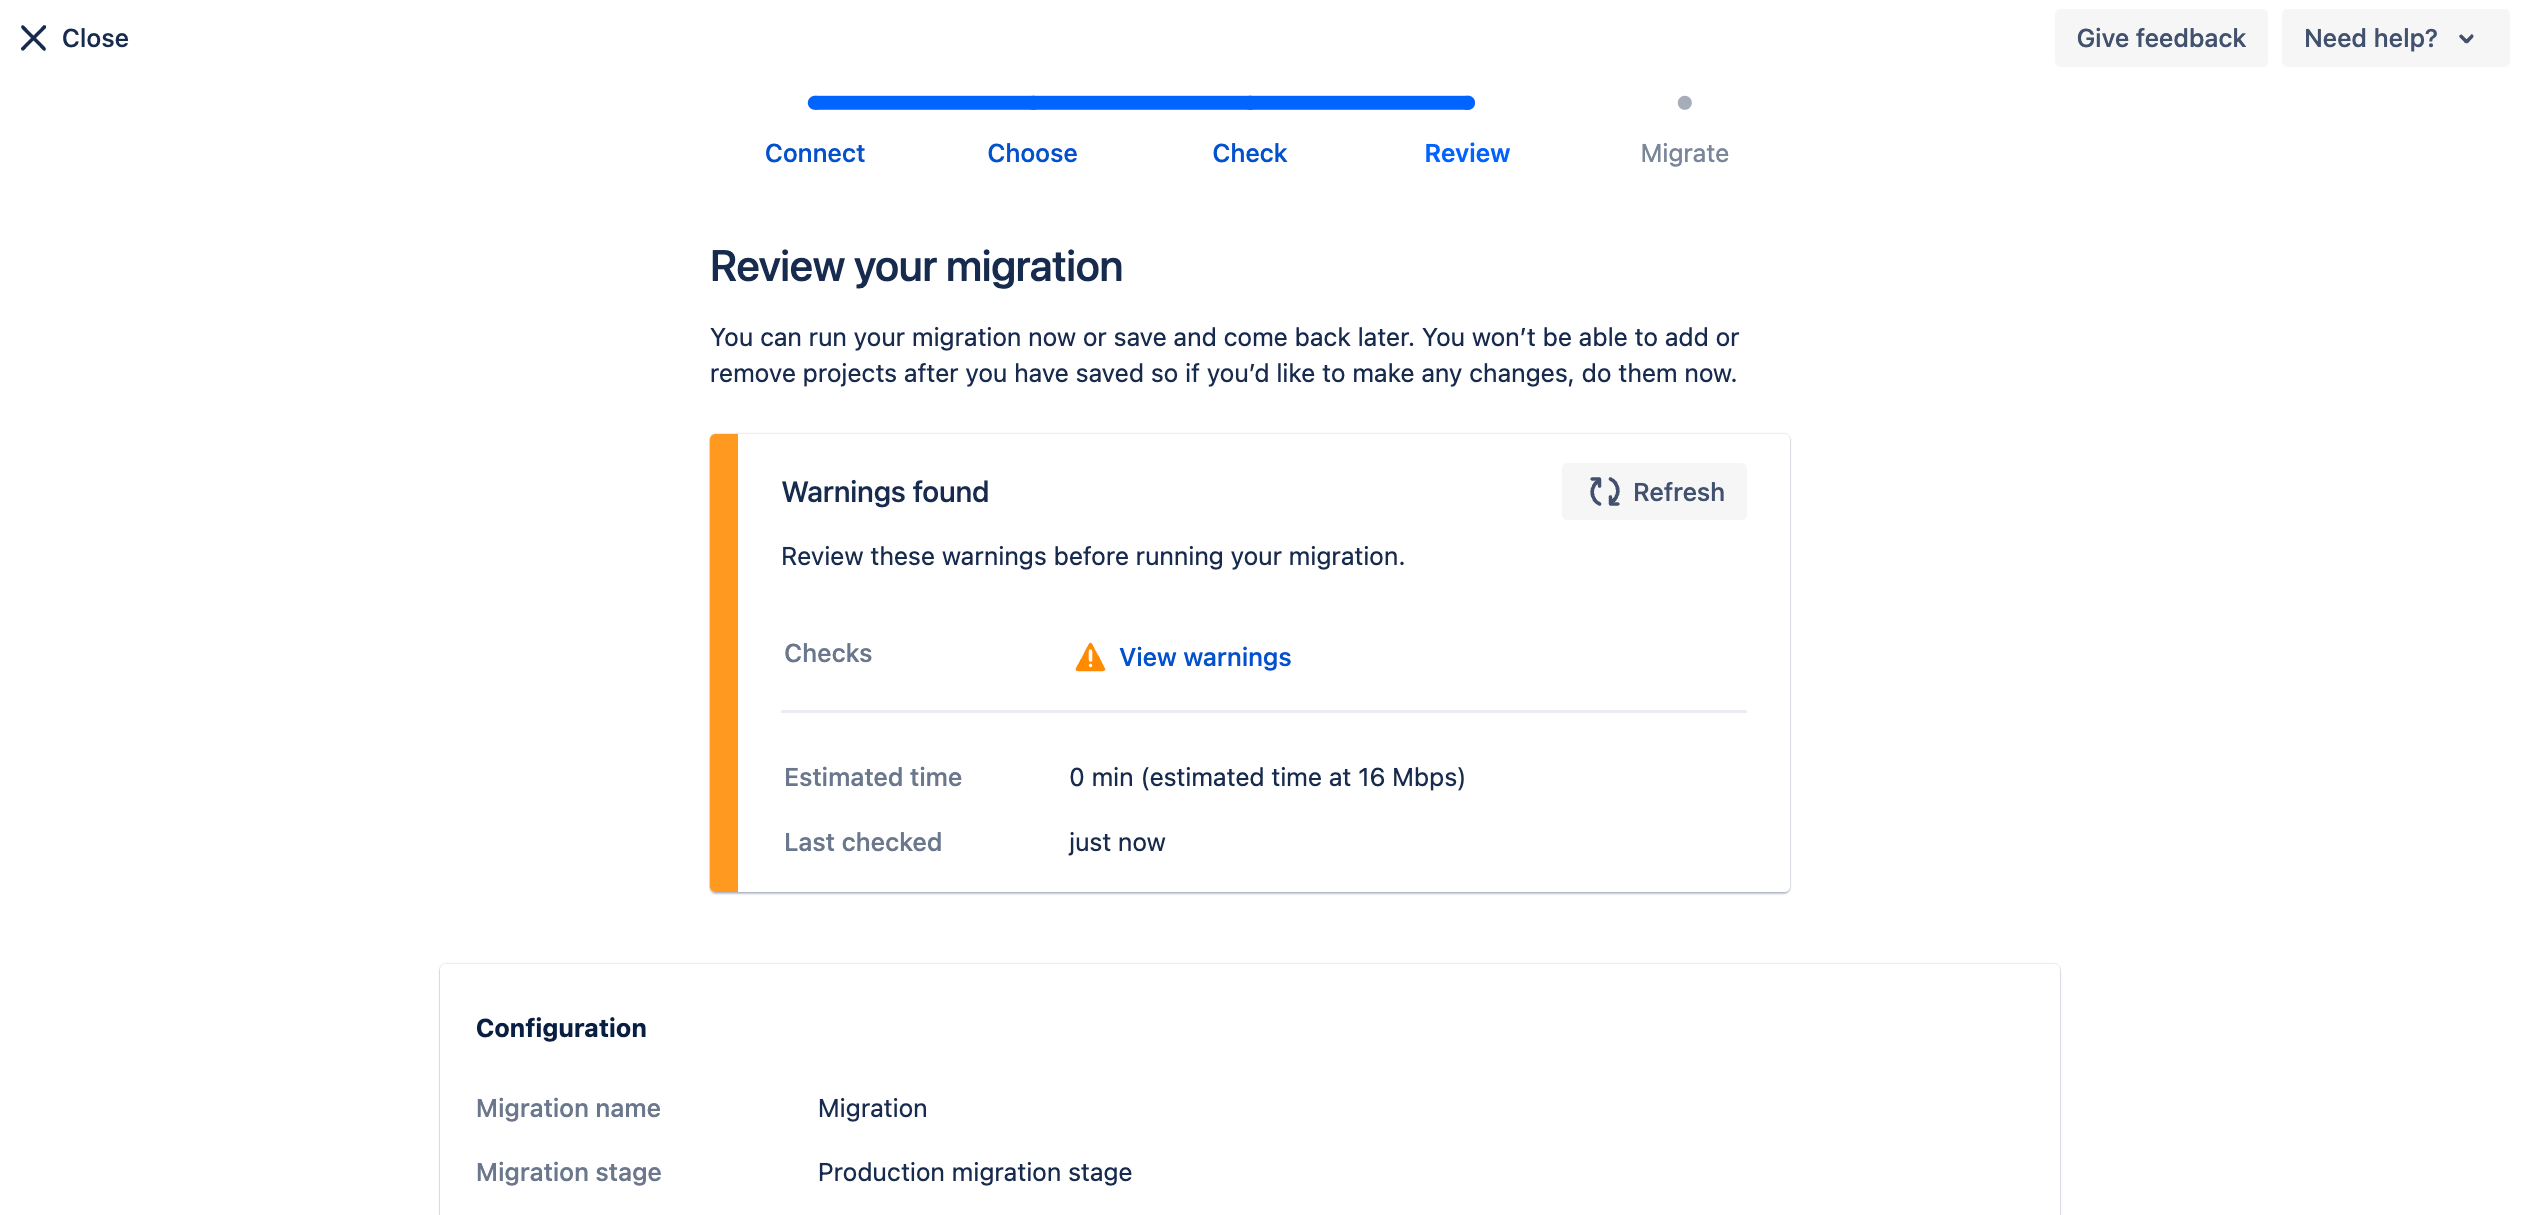 Details of a migration plan shown on the "Review your migration" screen.